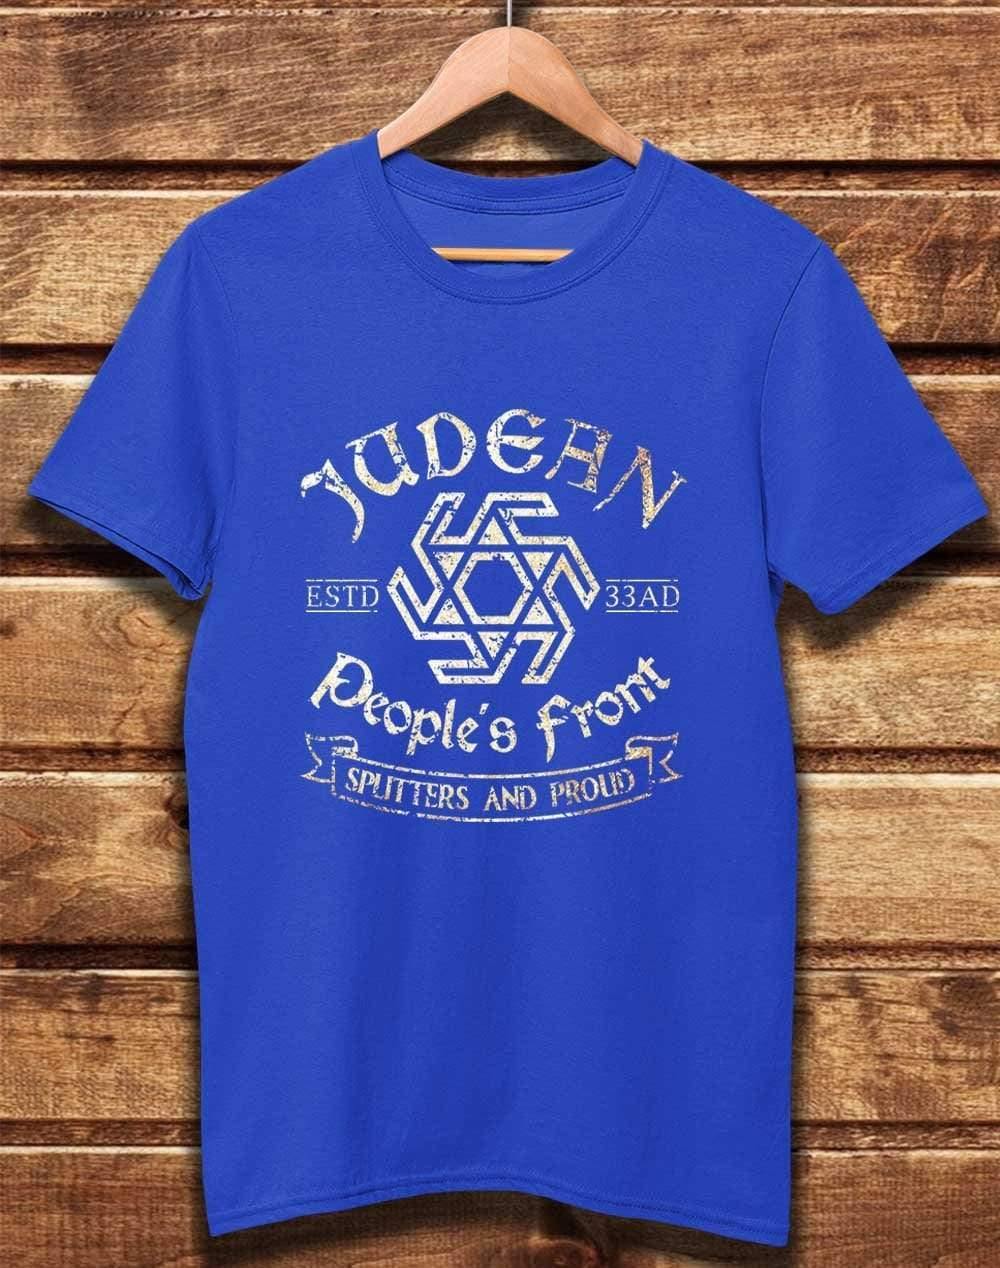 DELUXE Judean People's Front Organic Cotton T-Shirt XS / Bright Blue  - Off World Tees